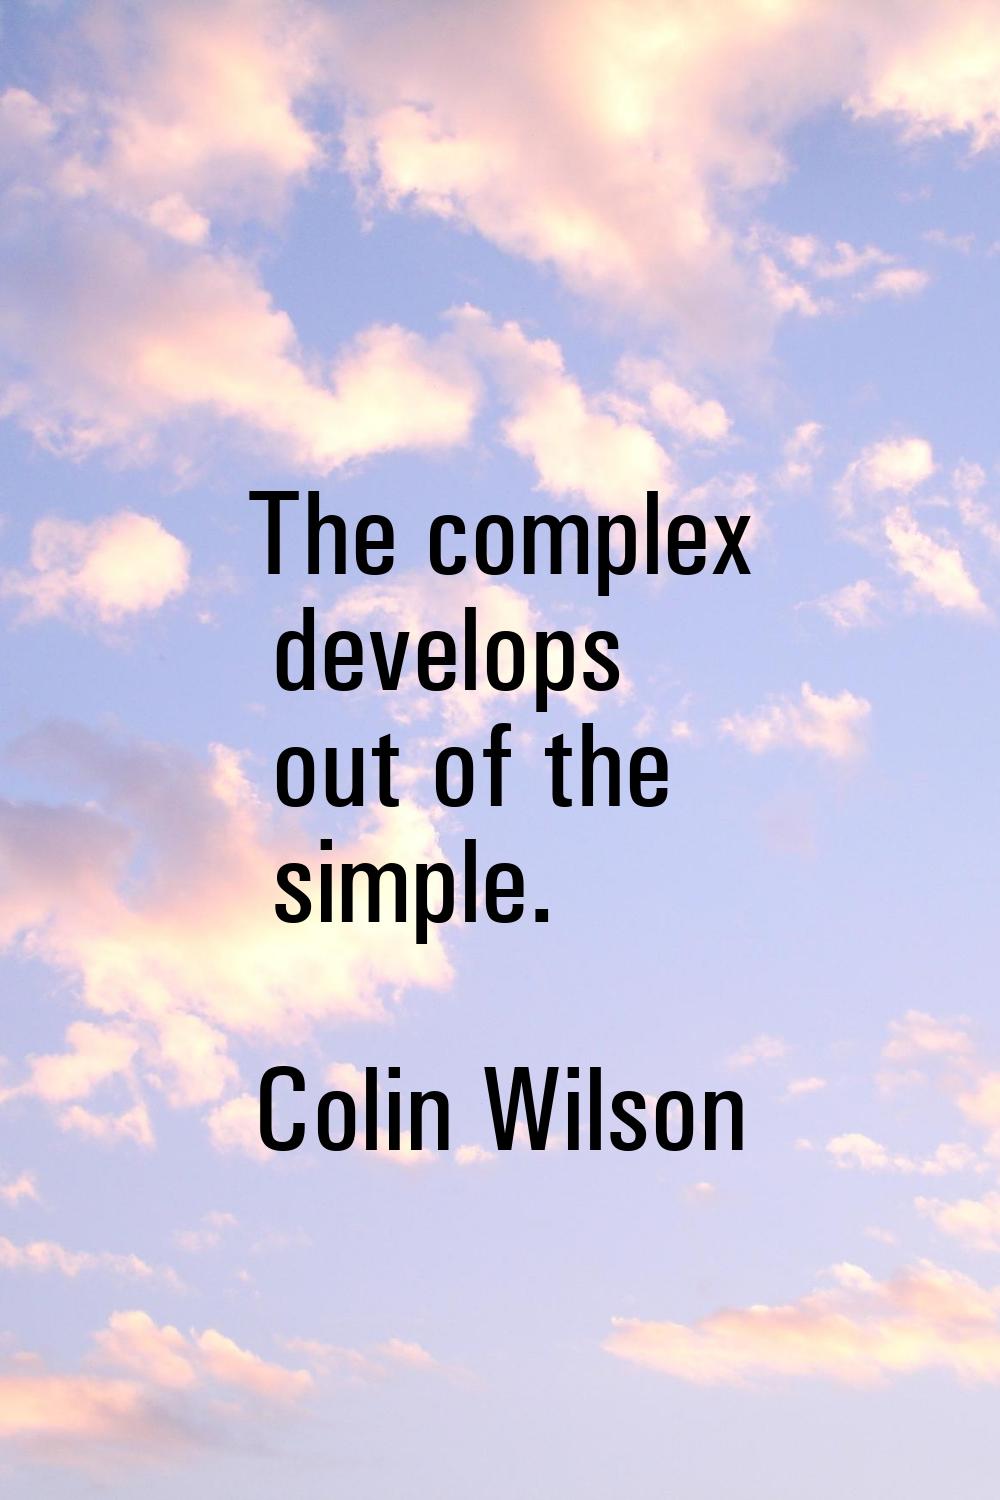 The complex develops out of the simple.